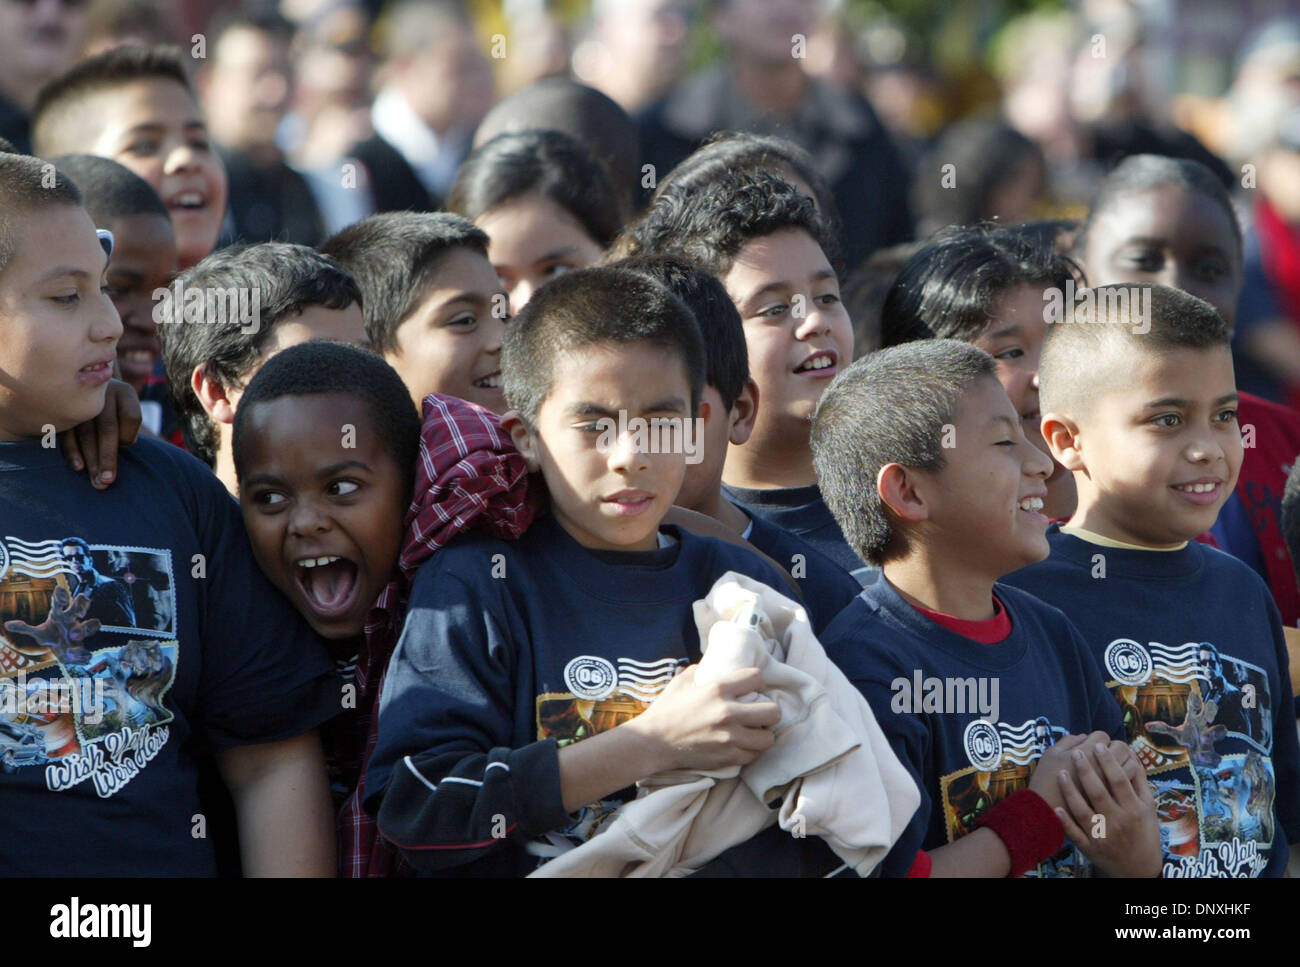 Dec 14, 2005; Los Angeles, CA, USA;  (Second from left) 10 year old  RASHAM RUSH screams as he sees the  6,000-pound, 20-foot-tall 'King Kong' gorilla arrive at Universal Studios for the theme park's holiday celebration and release of the film 'King Kong'. Mandatory Credit: Photo by Armando Arorizo/ZUMA Press. (©) Copyright 2005 by Armando Arorizo Stock Photo